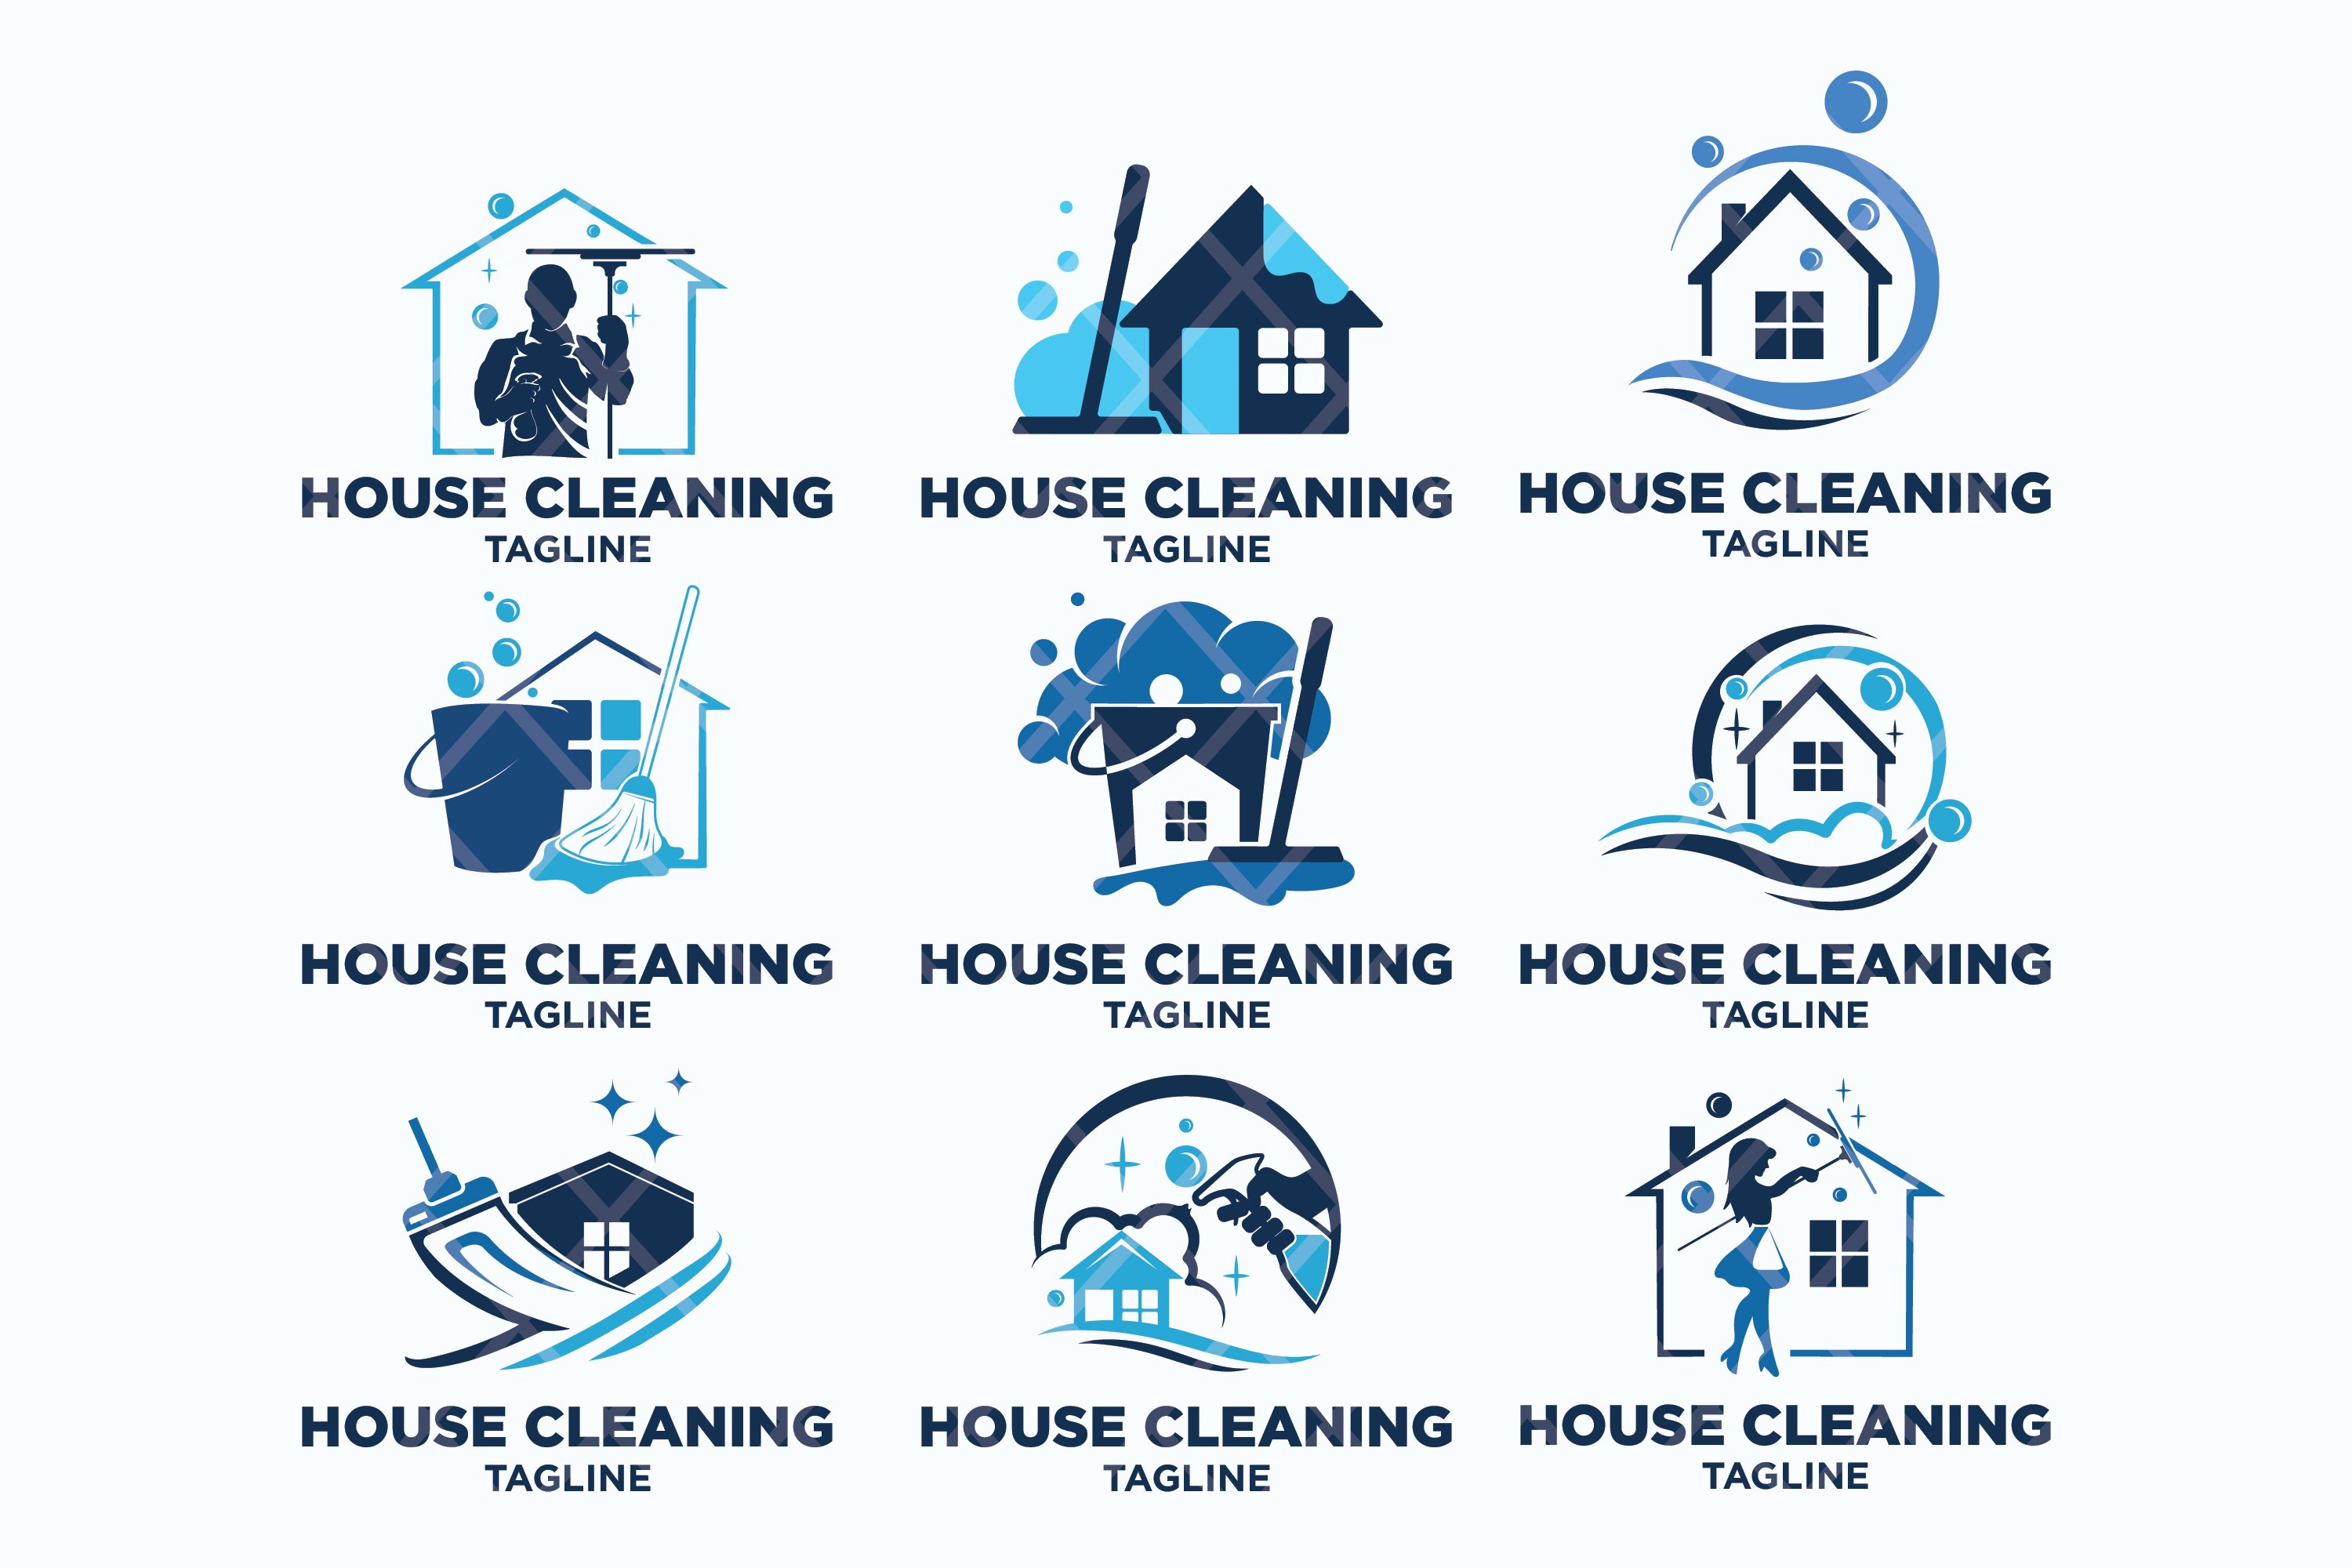 House Cleaning Service Logo Bundle cover image.